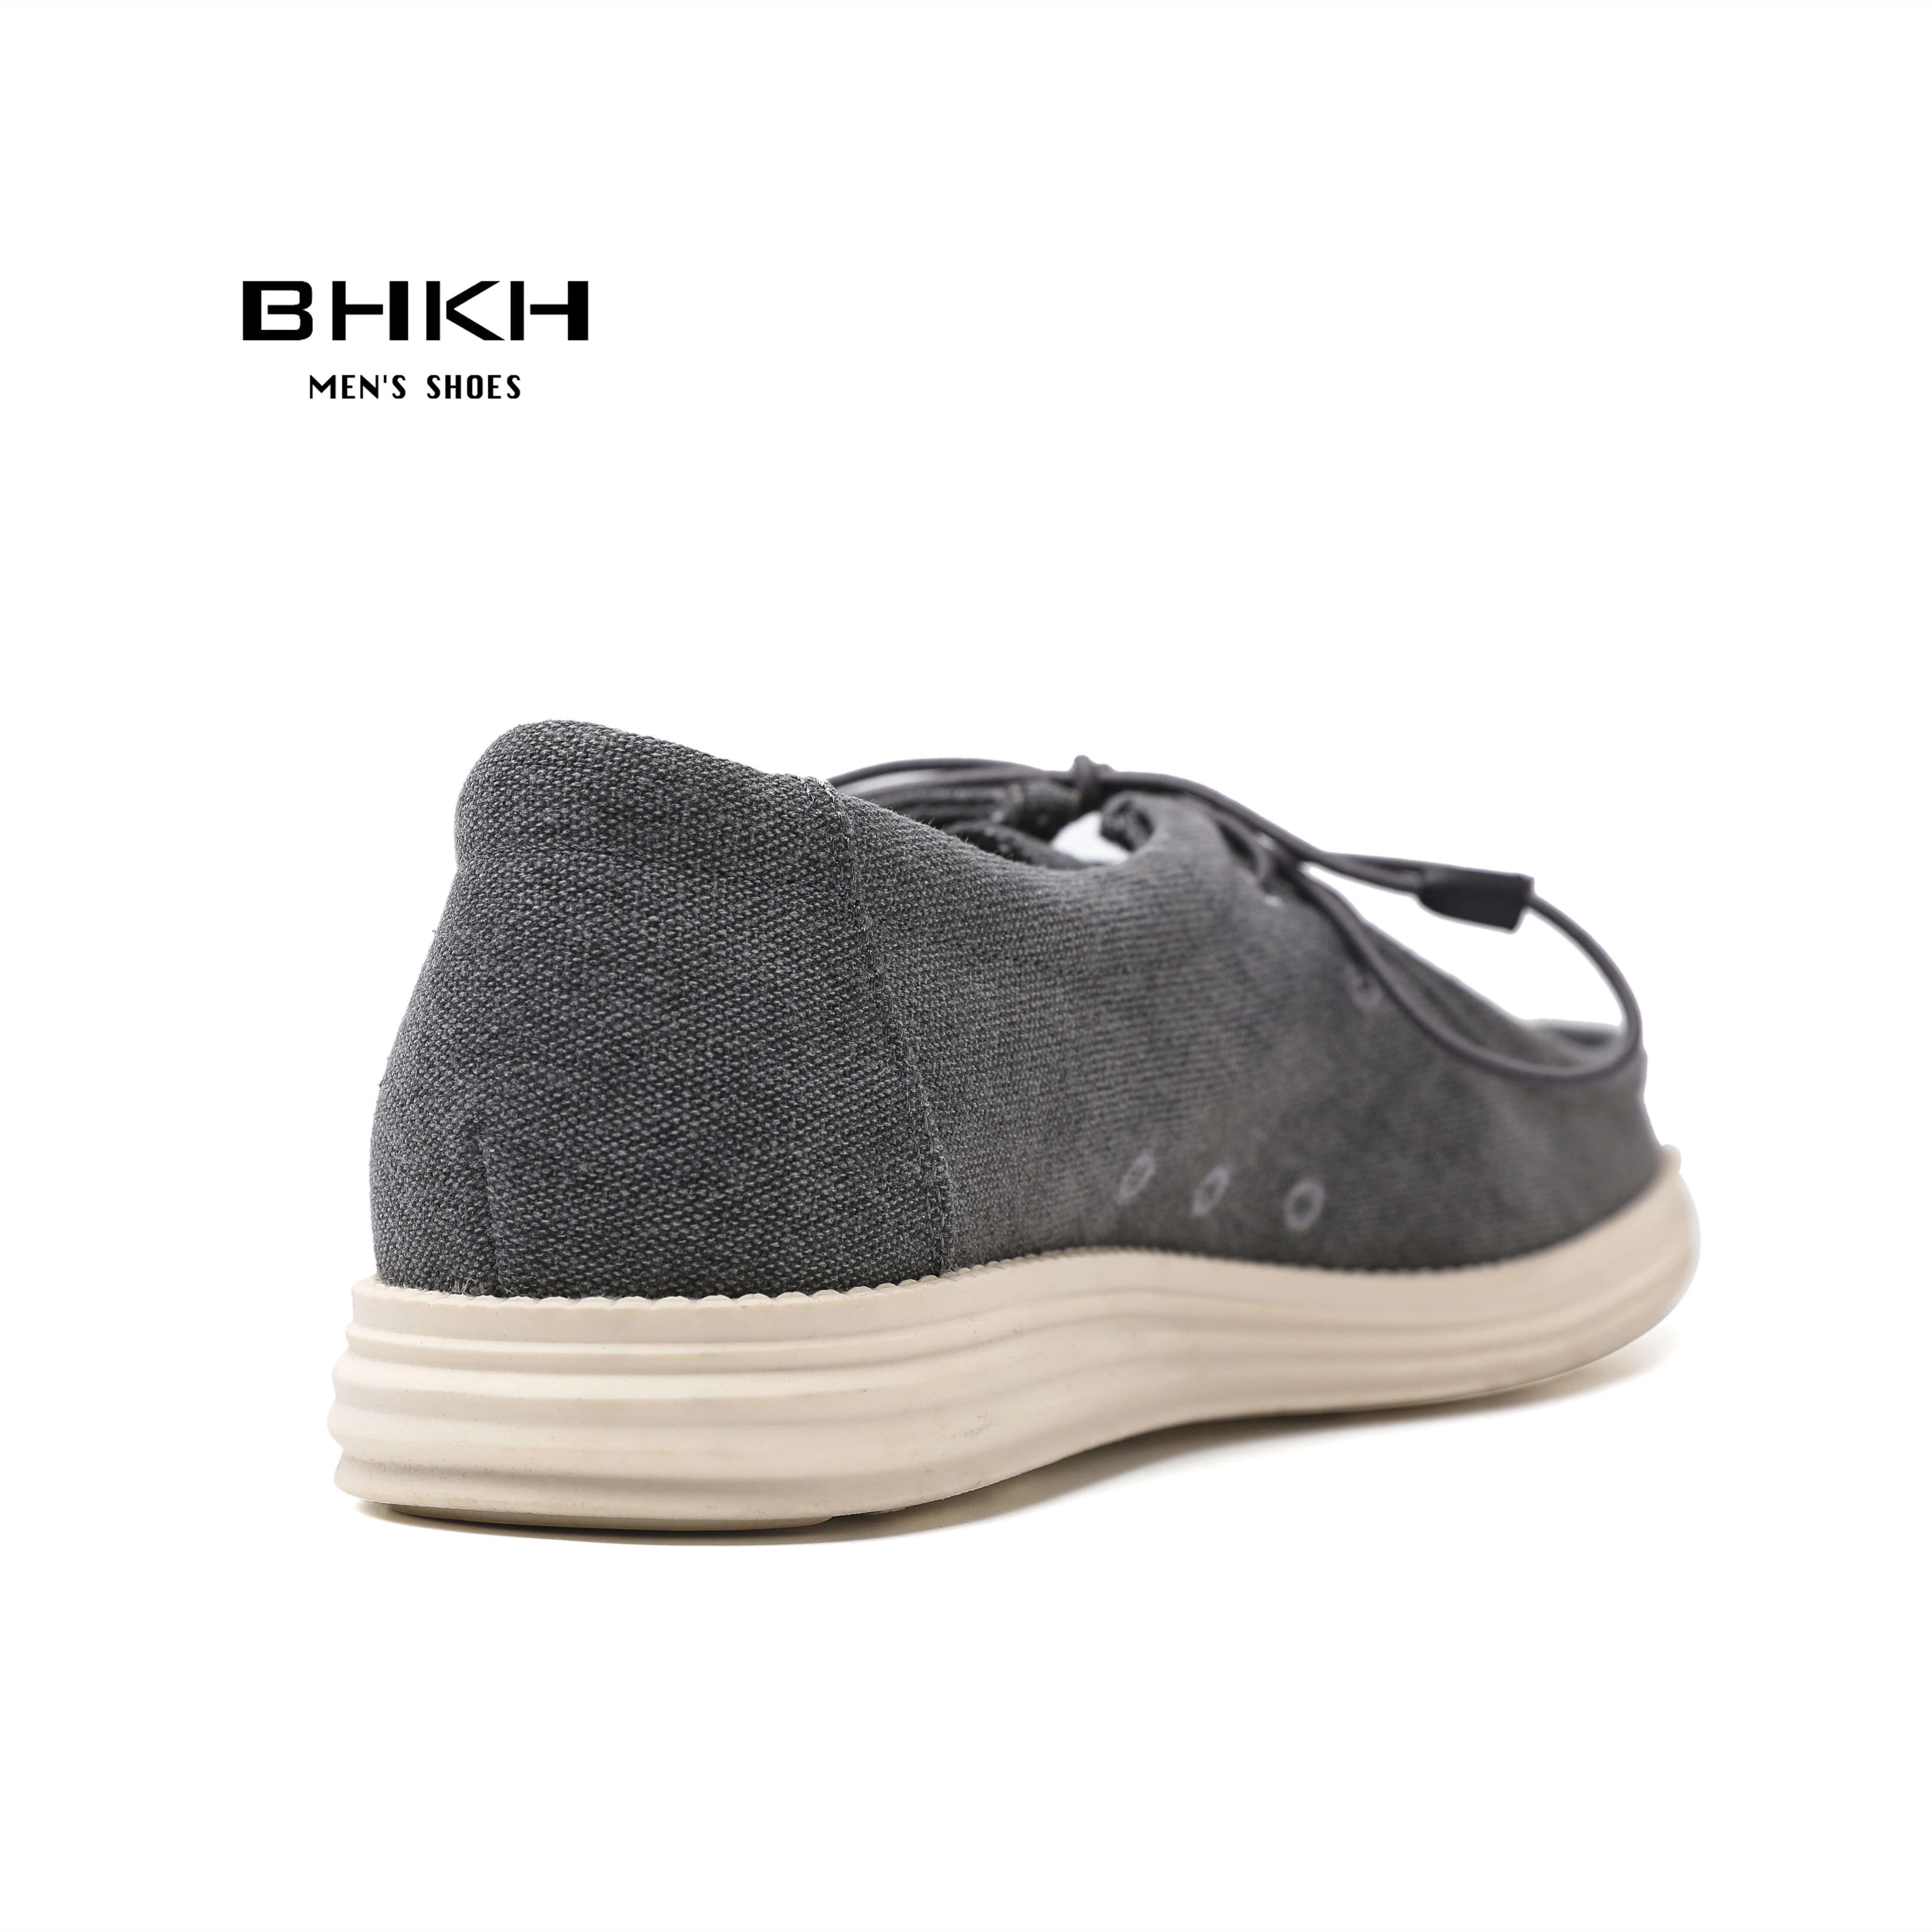 BHKH 2022 Autumn Men's Boat Shoes Fashion Smart Casual Shoes Men Comfortable Casual Shoes High Quality Shoes Breathable Shoes